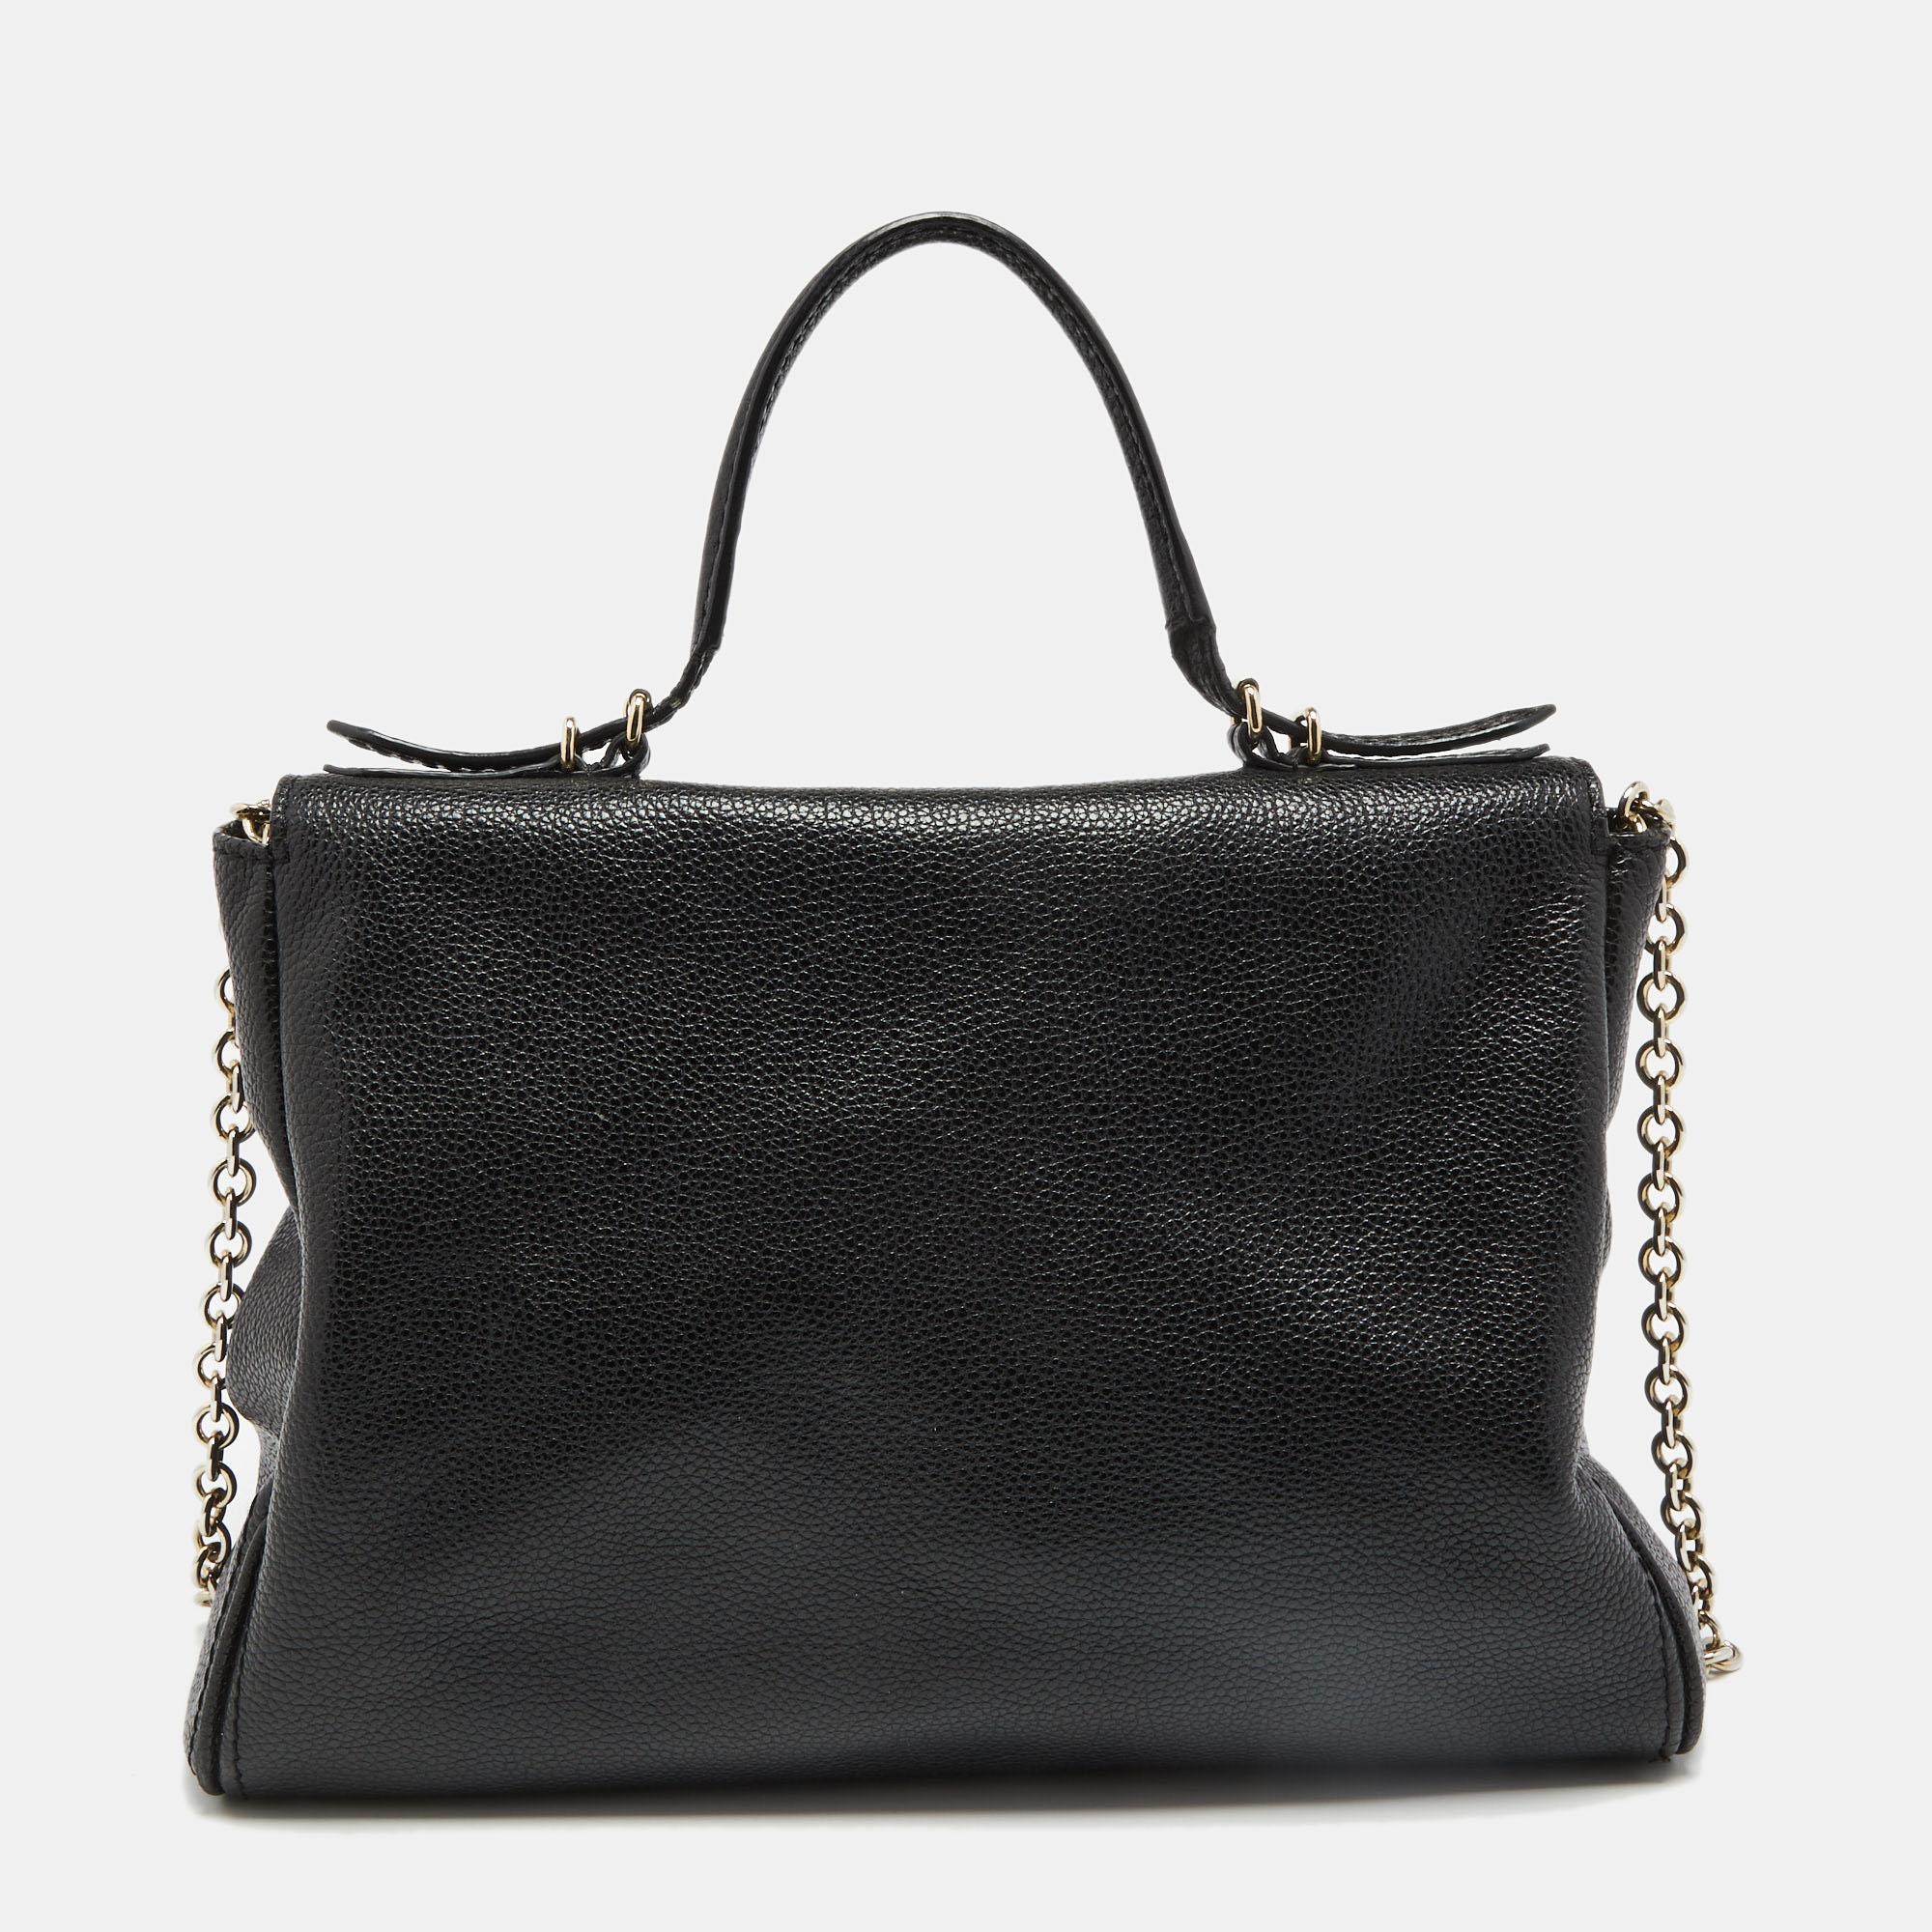 This Minuetto flap bag from CH Carolina Herrera is something you would go to season after season. It has been crafted from black leather and features a flap style. It comes with a shoulder strap in addition to a top handle. The uber-chic bag opens